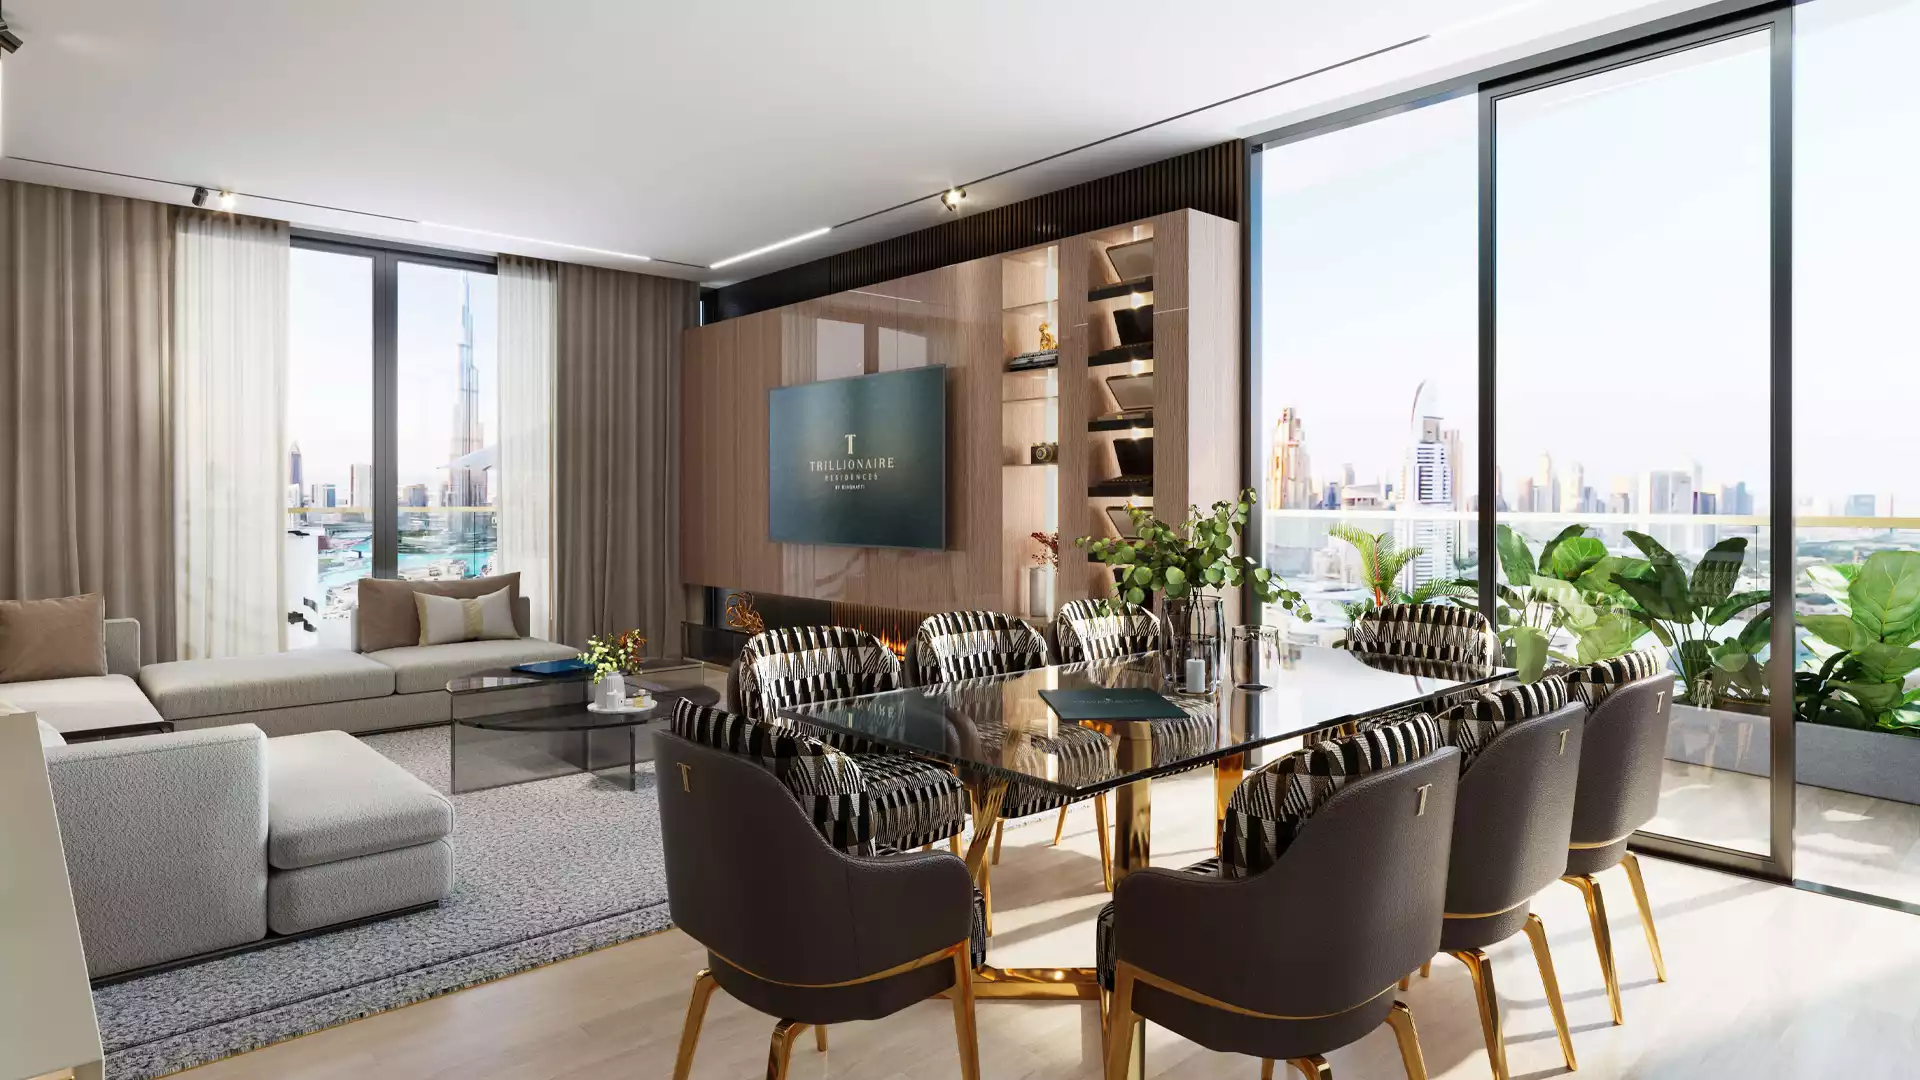 Edge-Realty-1 BR For Sale in Trillionaire Residences